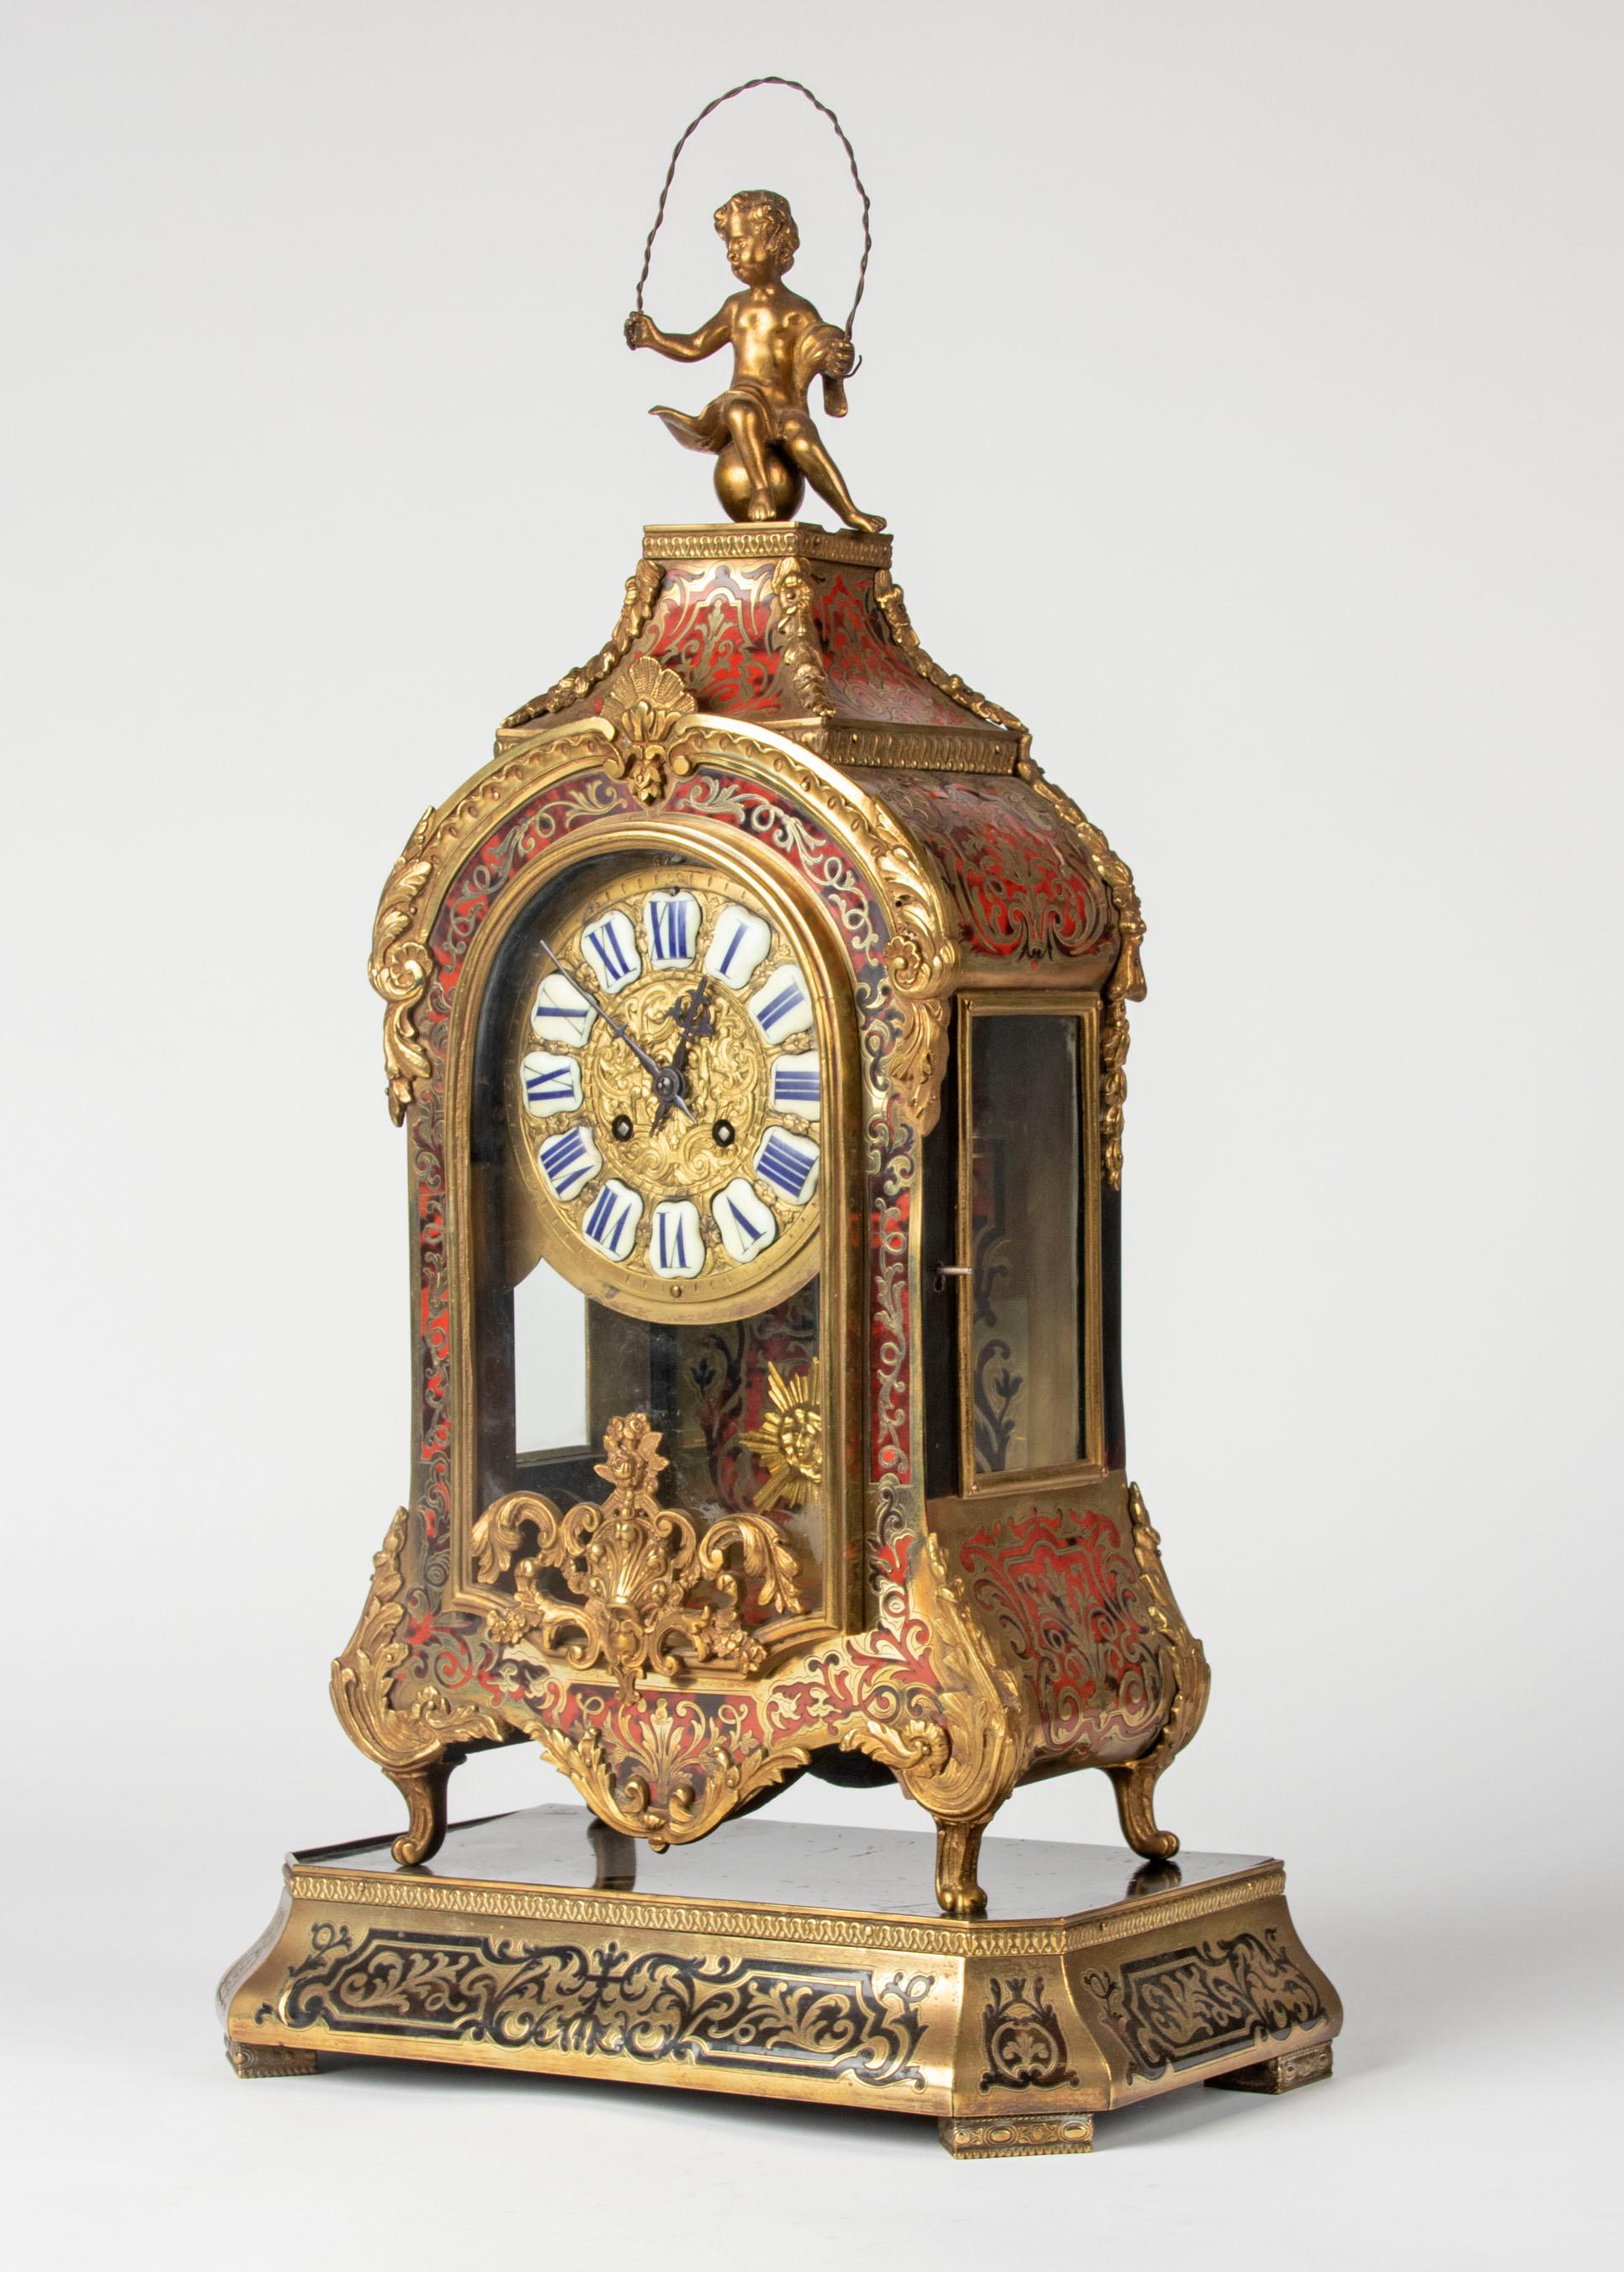 A fine quality French Régence style mantle clock in the style of André-Charles Boulle, with matching base. The cabinet is made of wood, inlaid with engraved brass and red tortoise shell. Embellished with bronze ornaments. The whole is in good